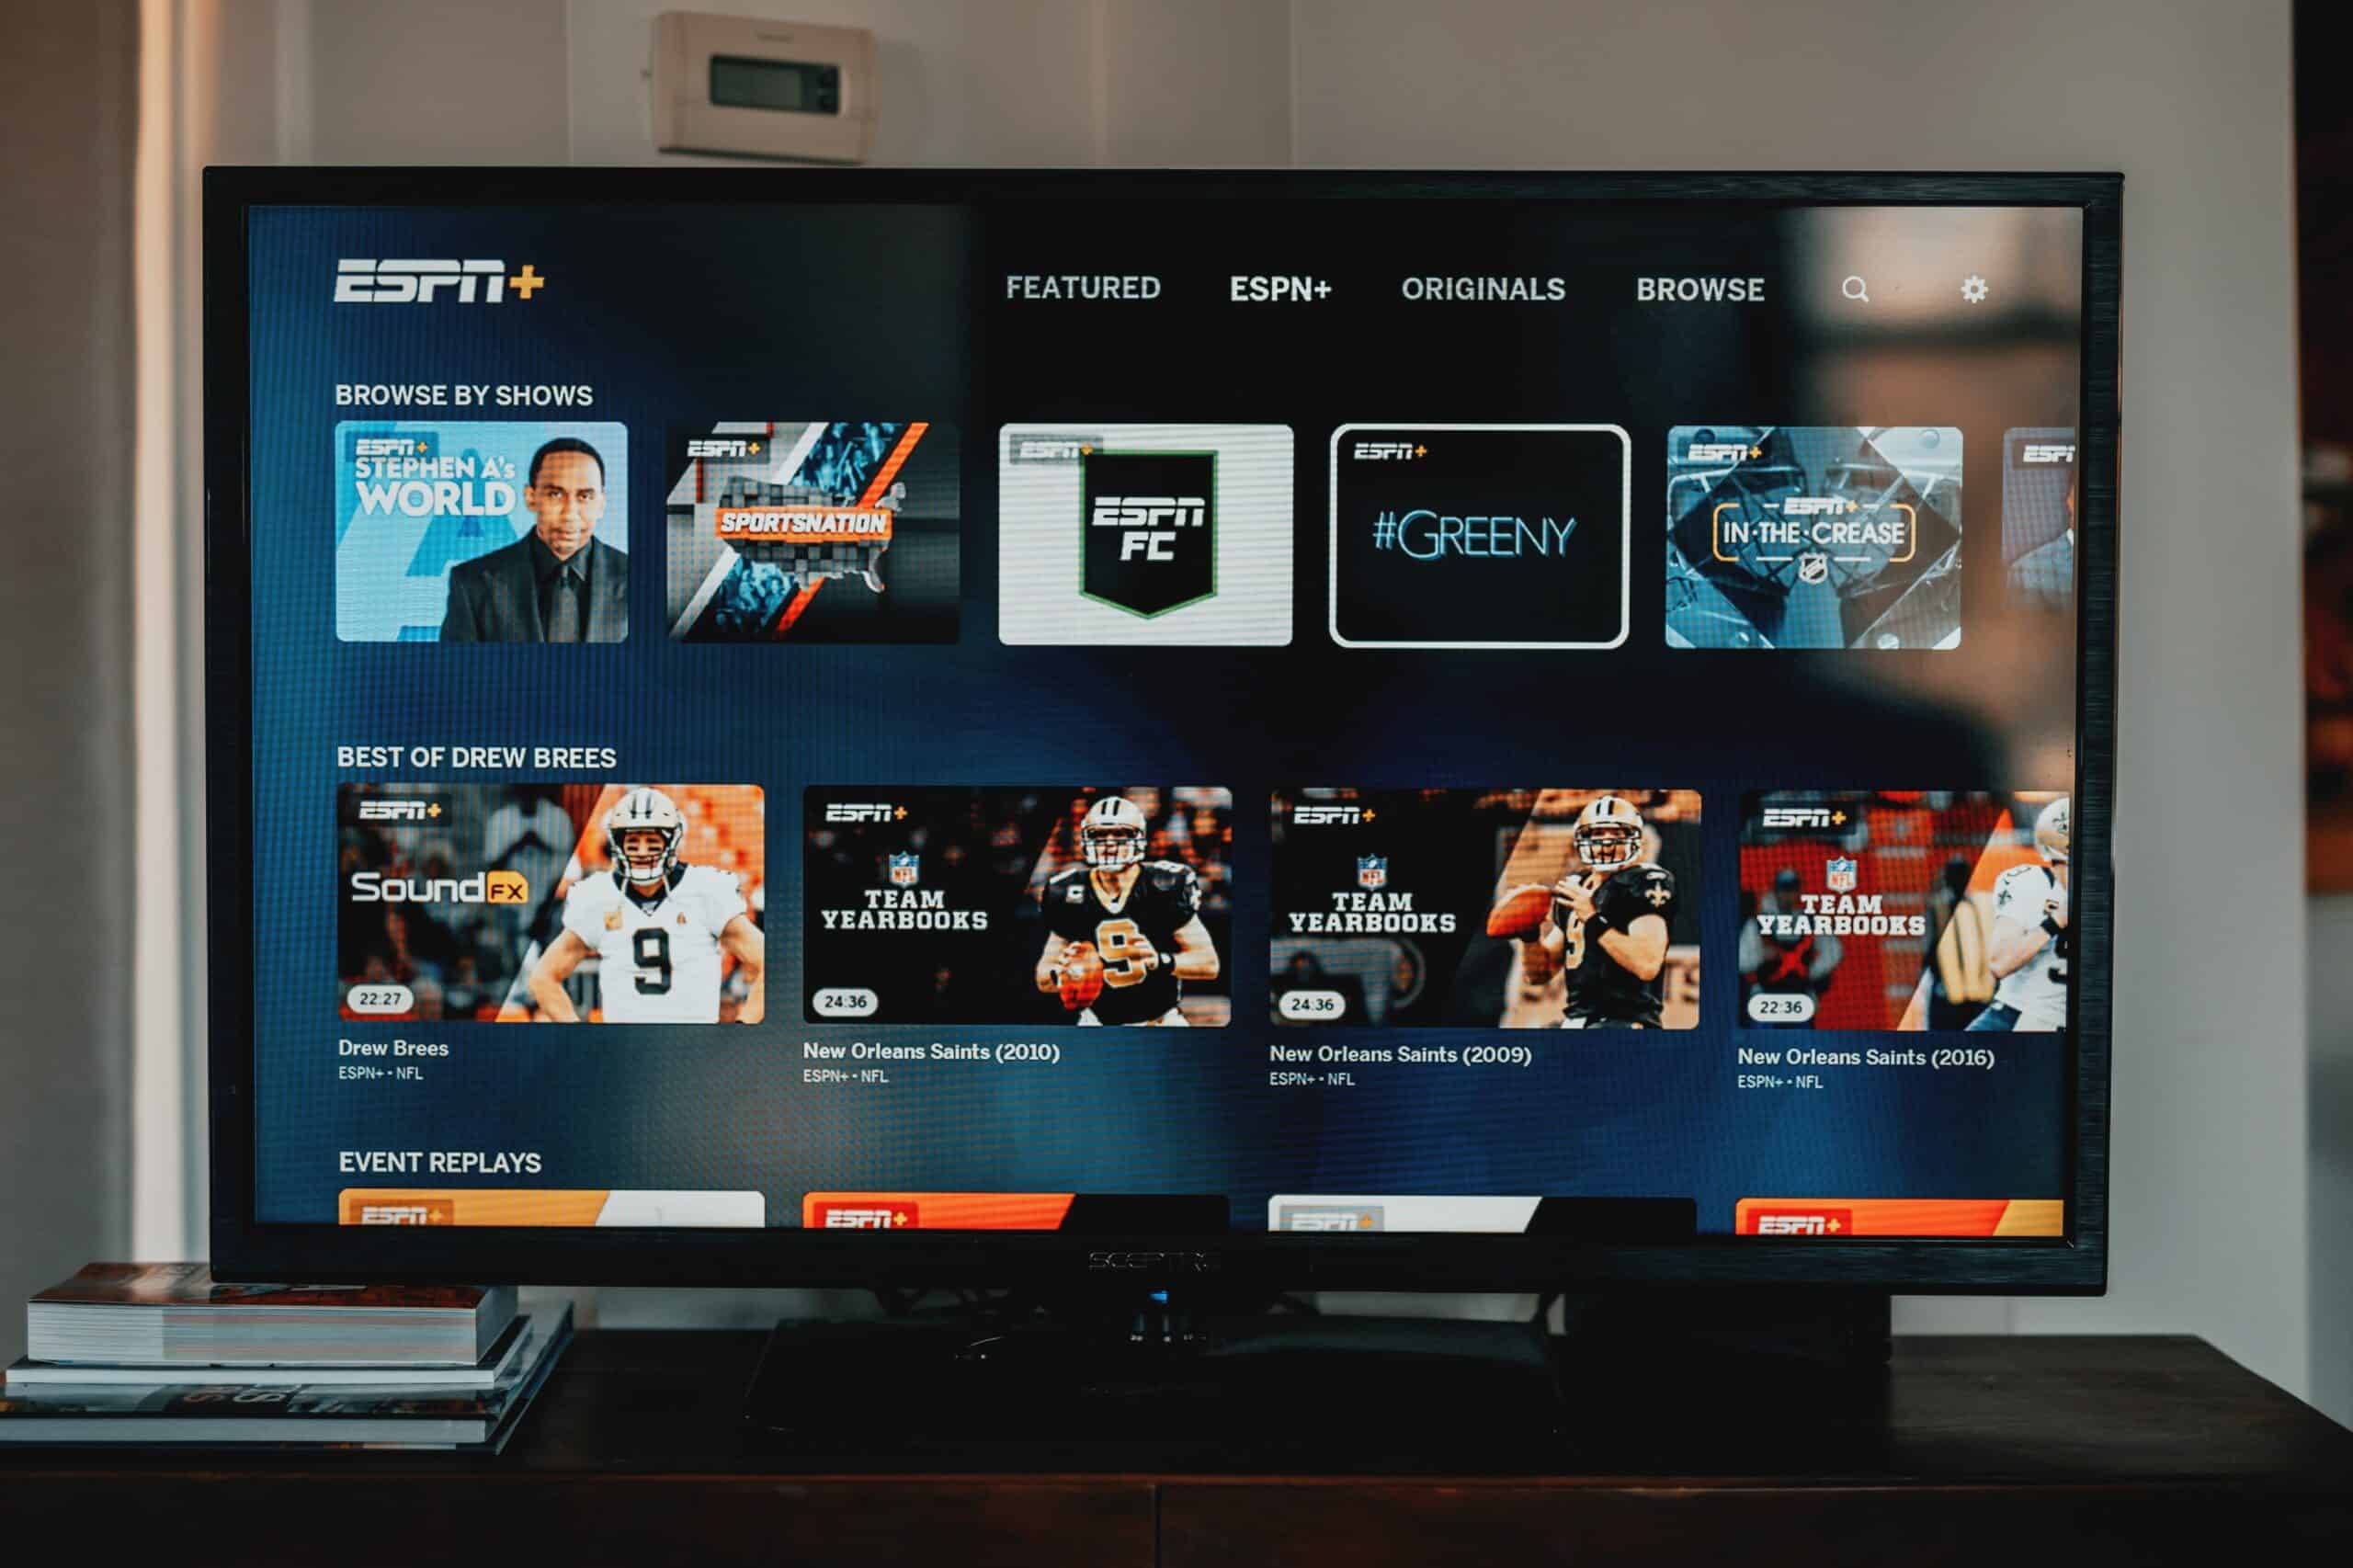 Image of flatscreen tv on with ESPN+ home screen on the screen